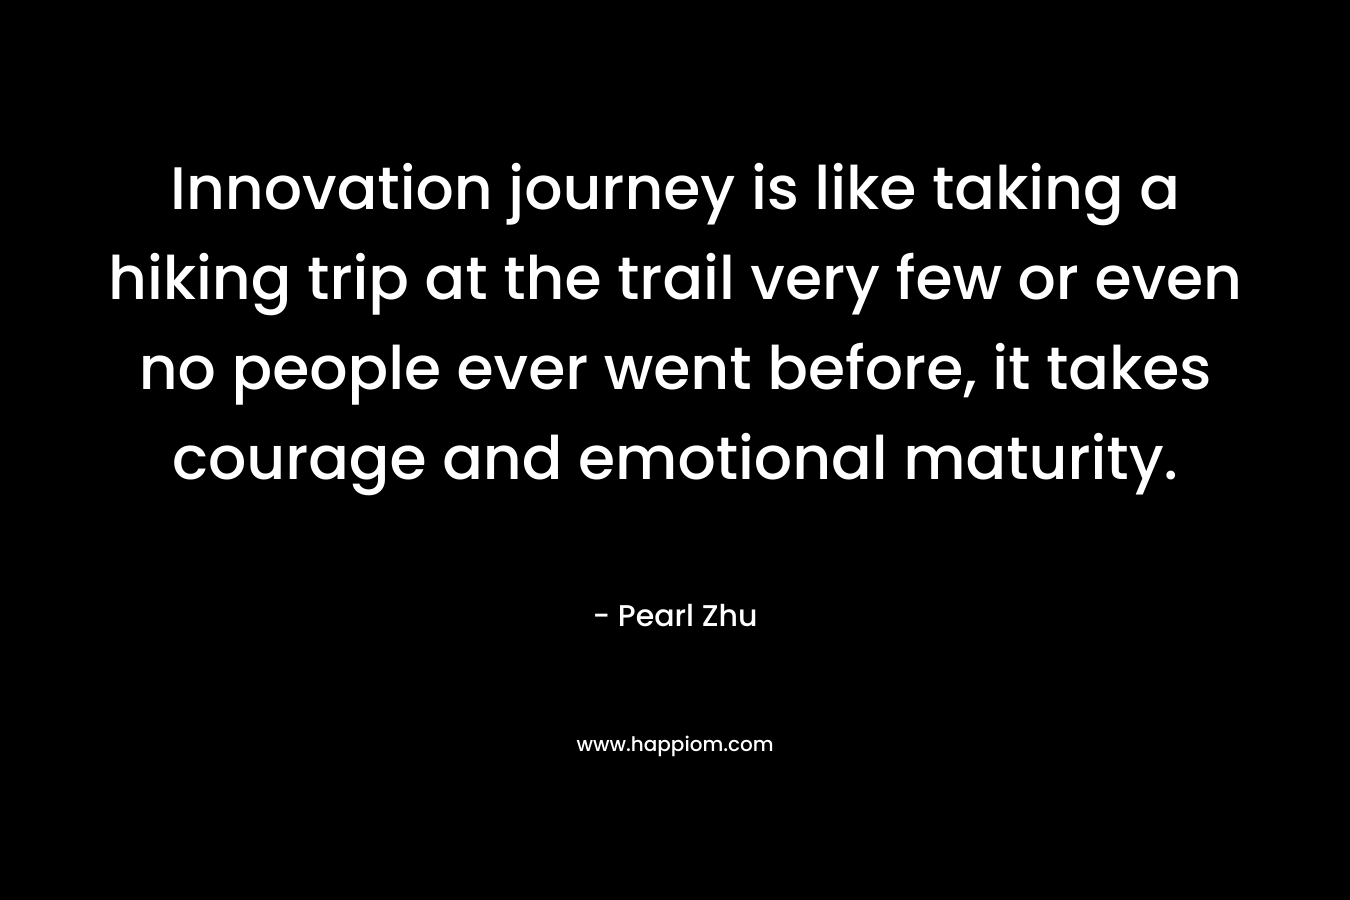 Innovation journey is like taking a hiking trip at the trail very few or even no people ever went before, it takes courage and emotional maturity. – Pearl  Zhu